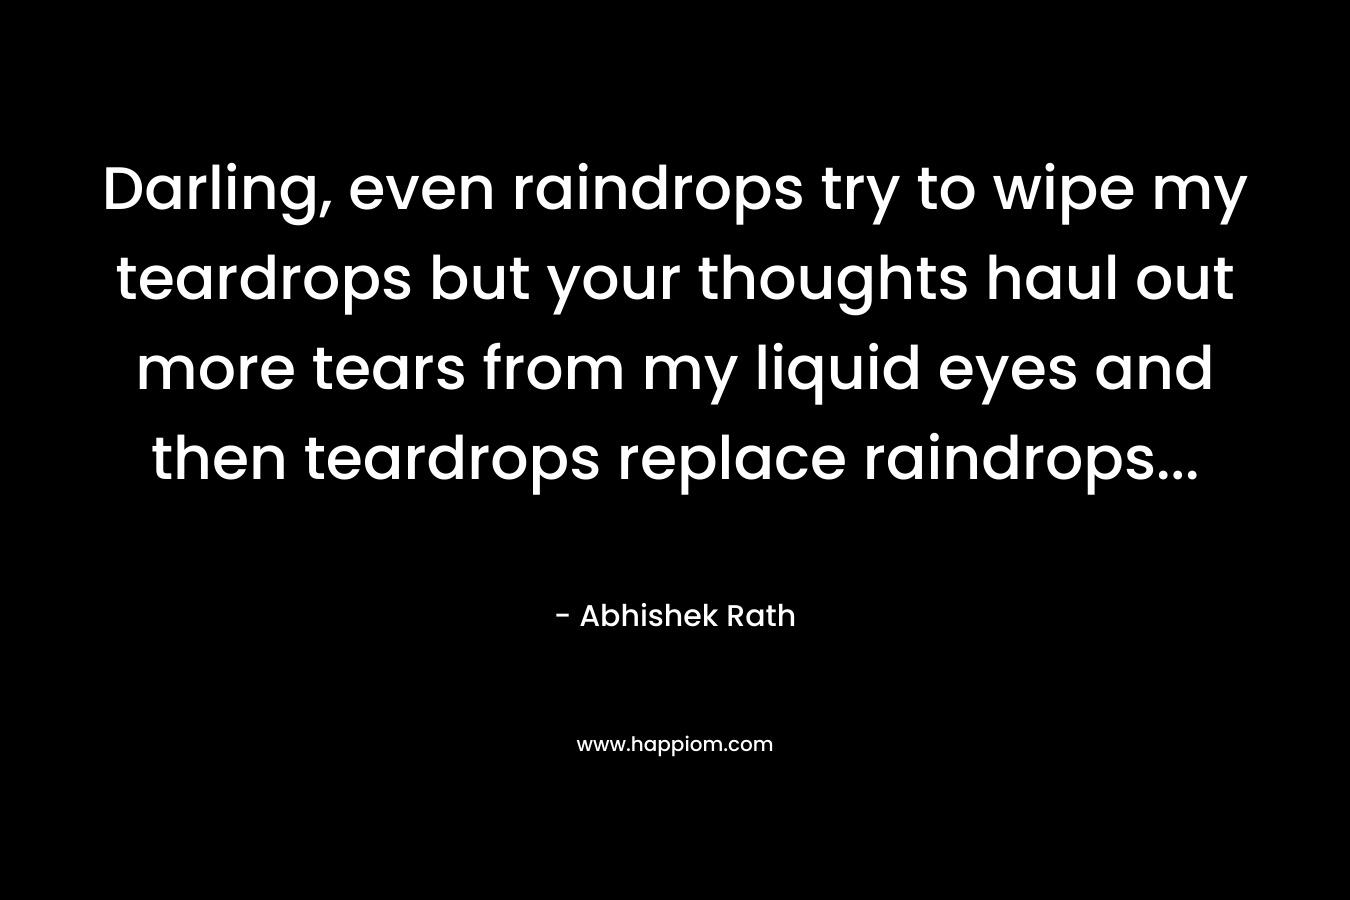 Darling, even raindrops try to wipe my teardrops but your thoughts haul out more tears from my liquid eyes and then teardrops replace raindrops...